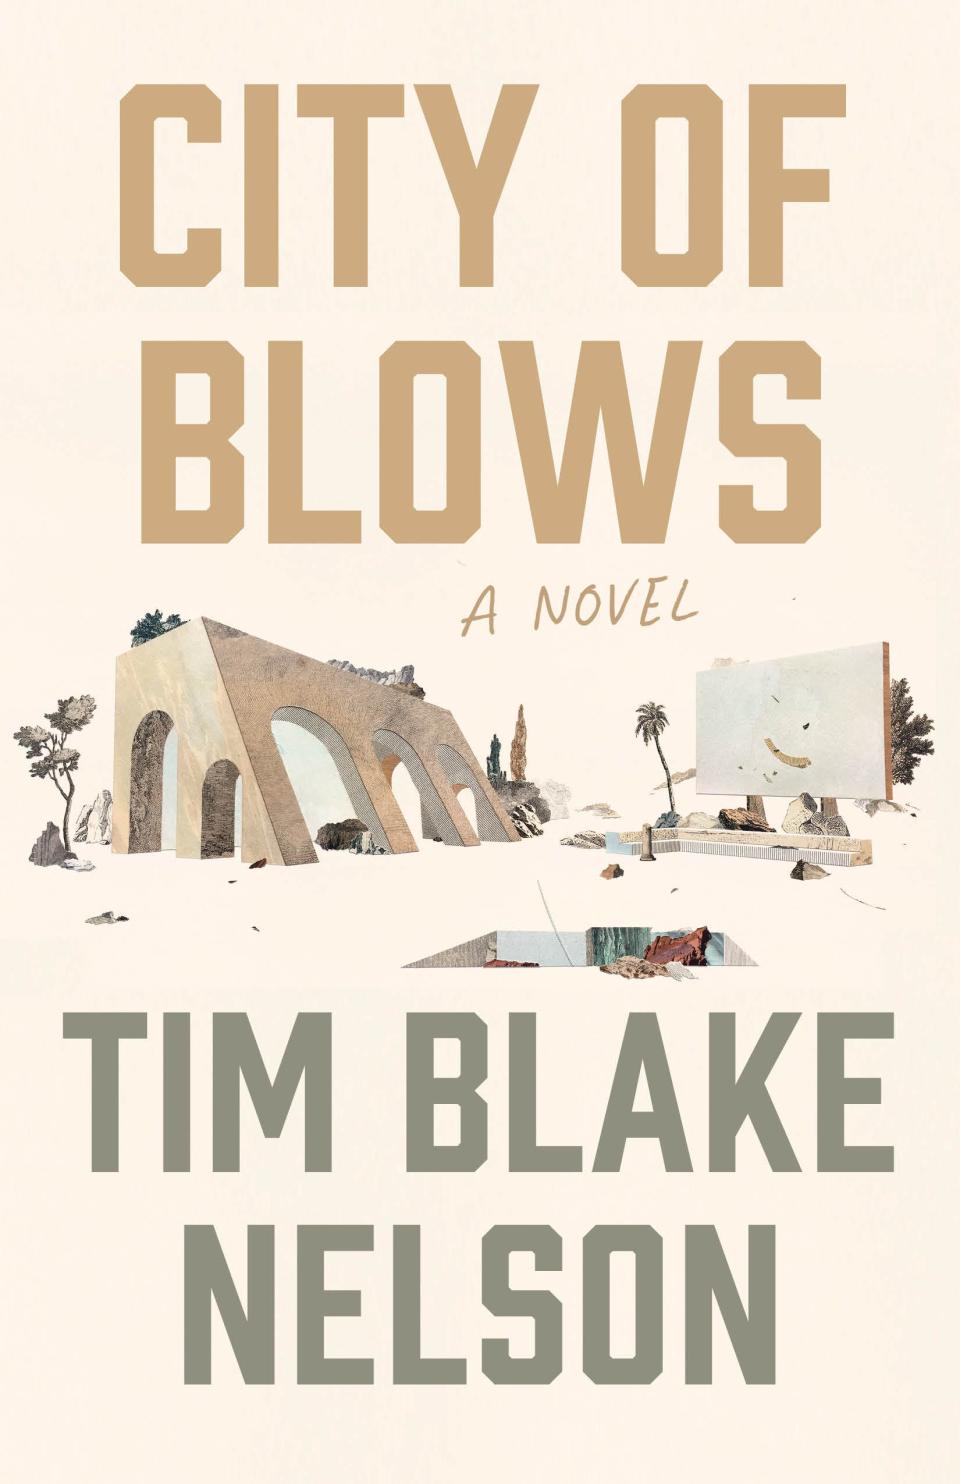 Actor, director, writer and Tulsa native Tim Blake Nelson in February released his debut novel, "City of Blows," via The Unnamed Press.